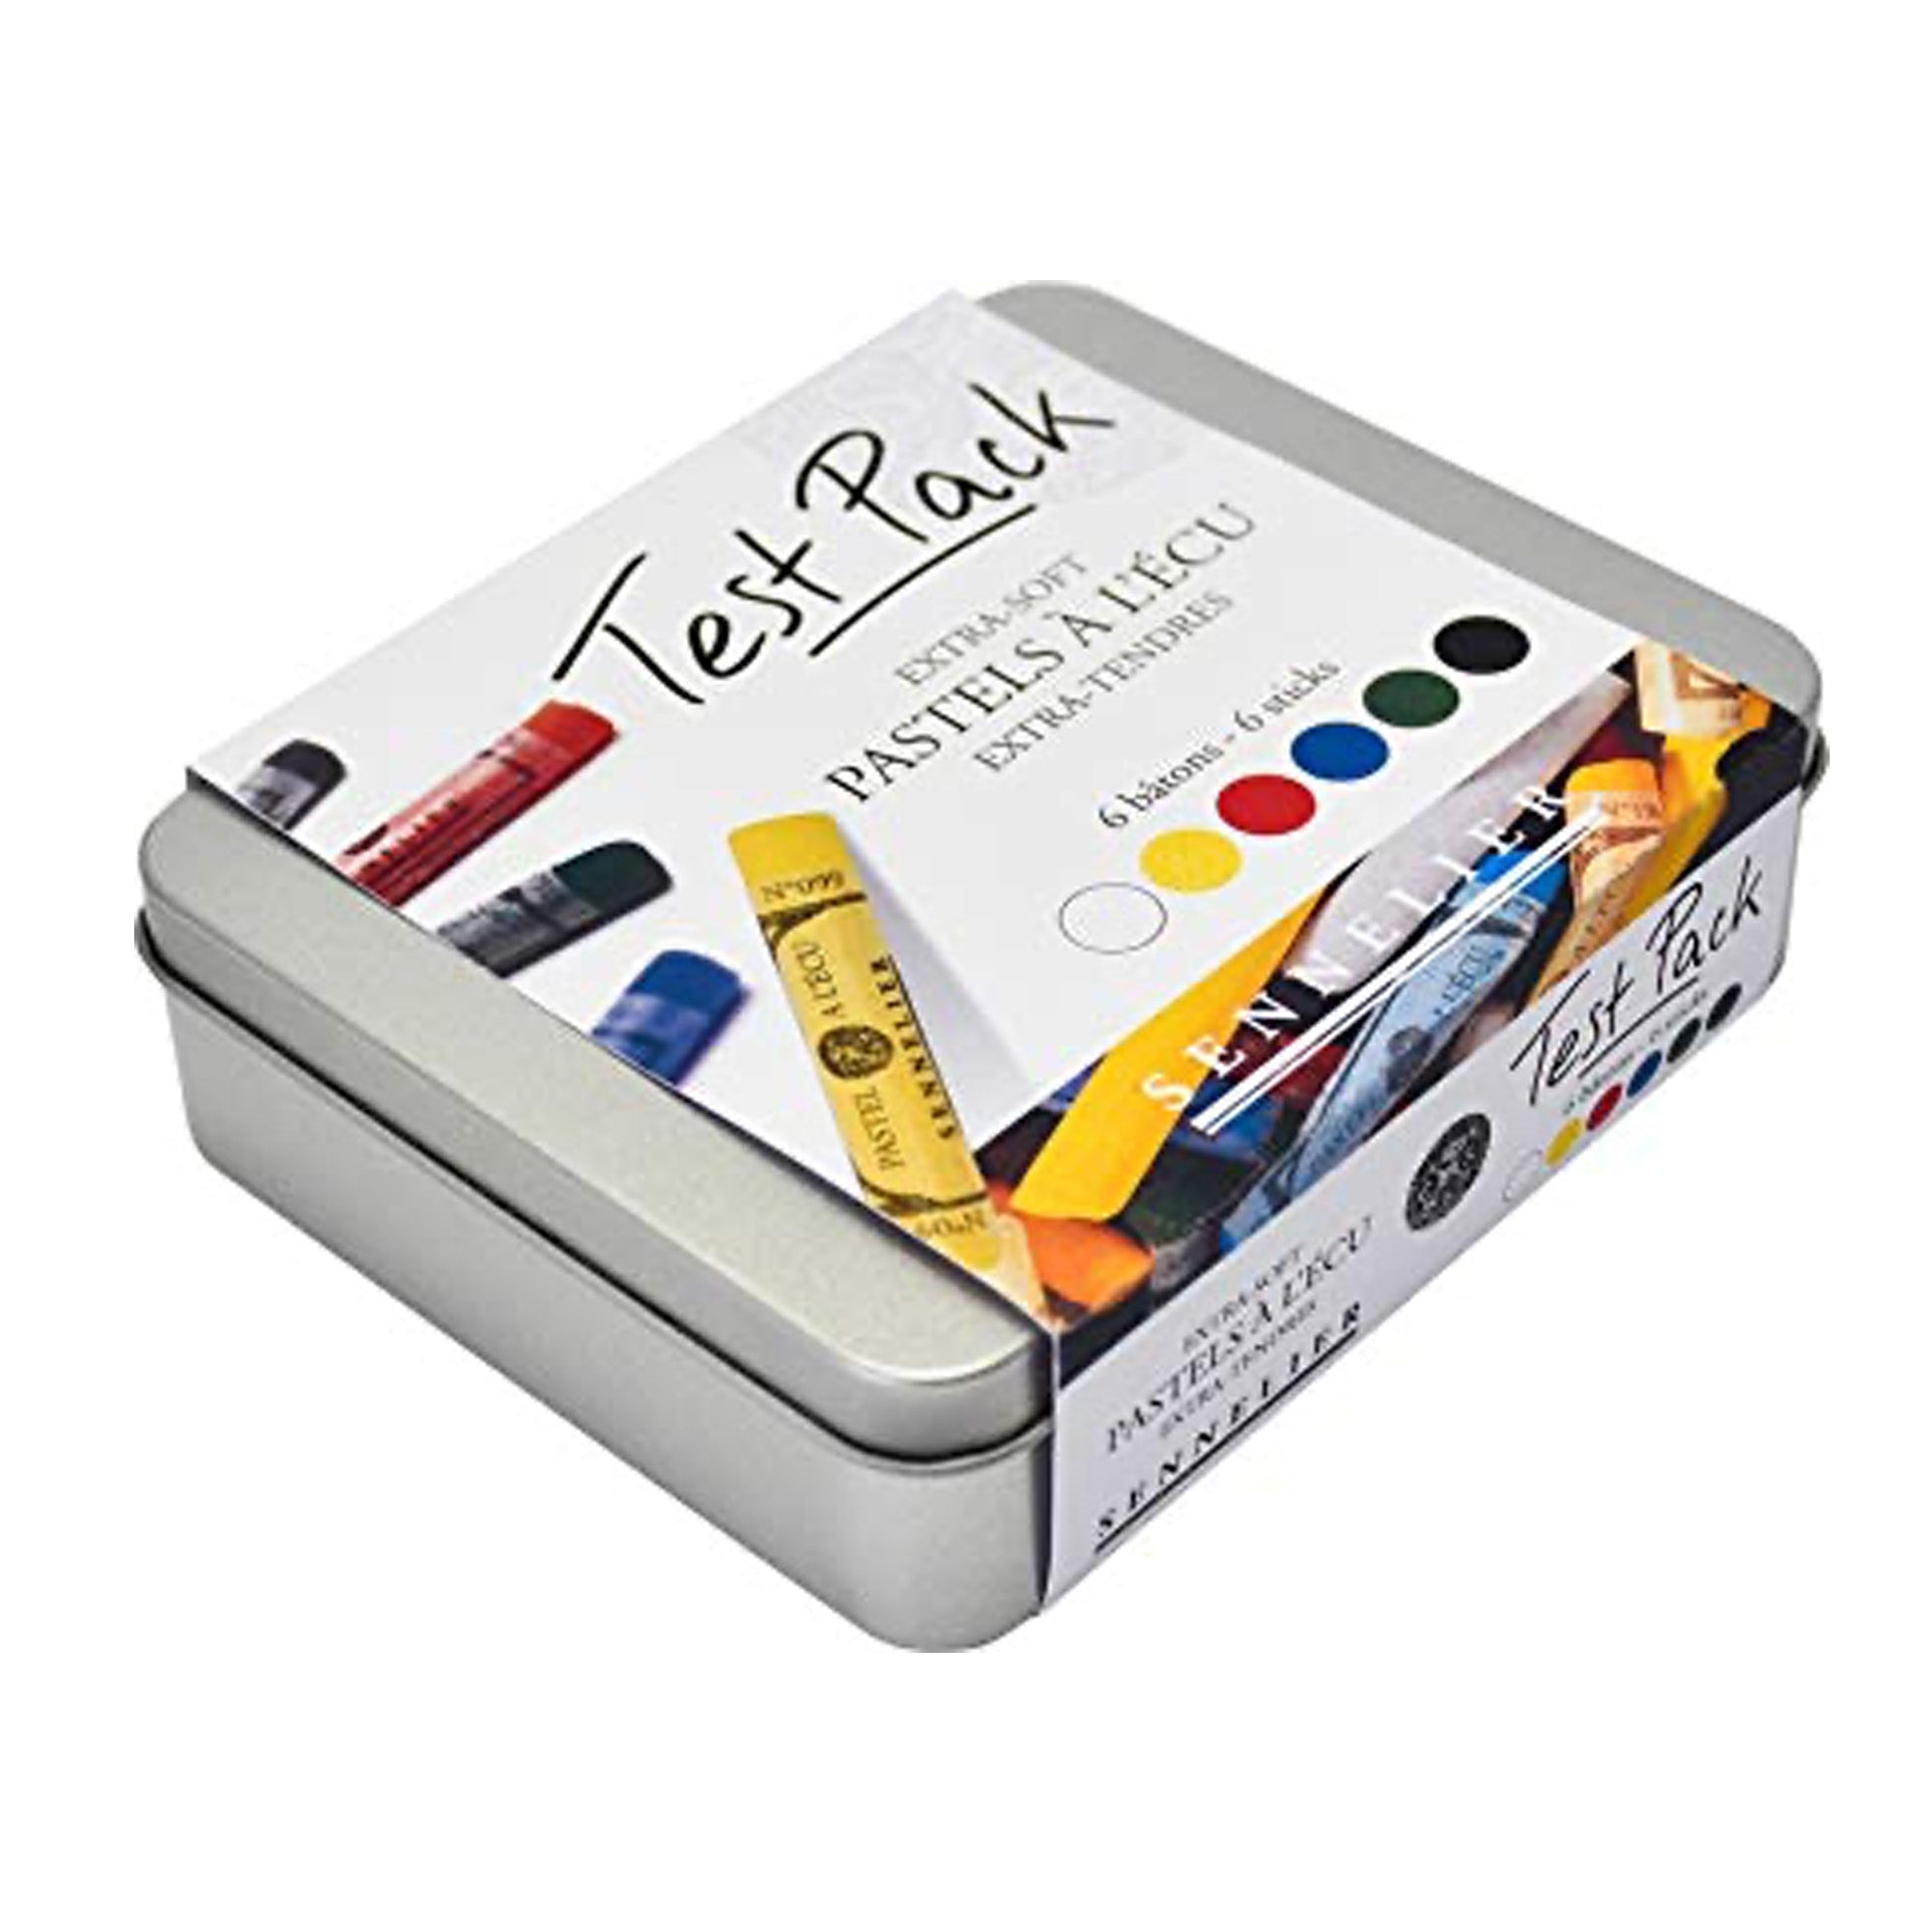 Sennelier Extra Soft Pastels Test Pack - Melbourne Etching Supplies